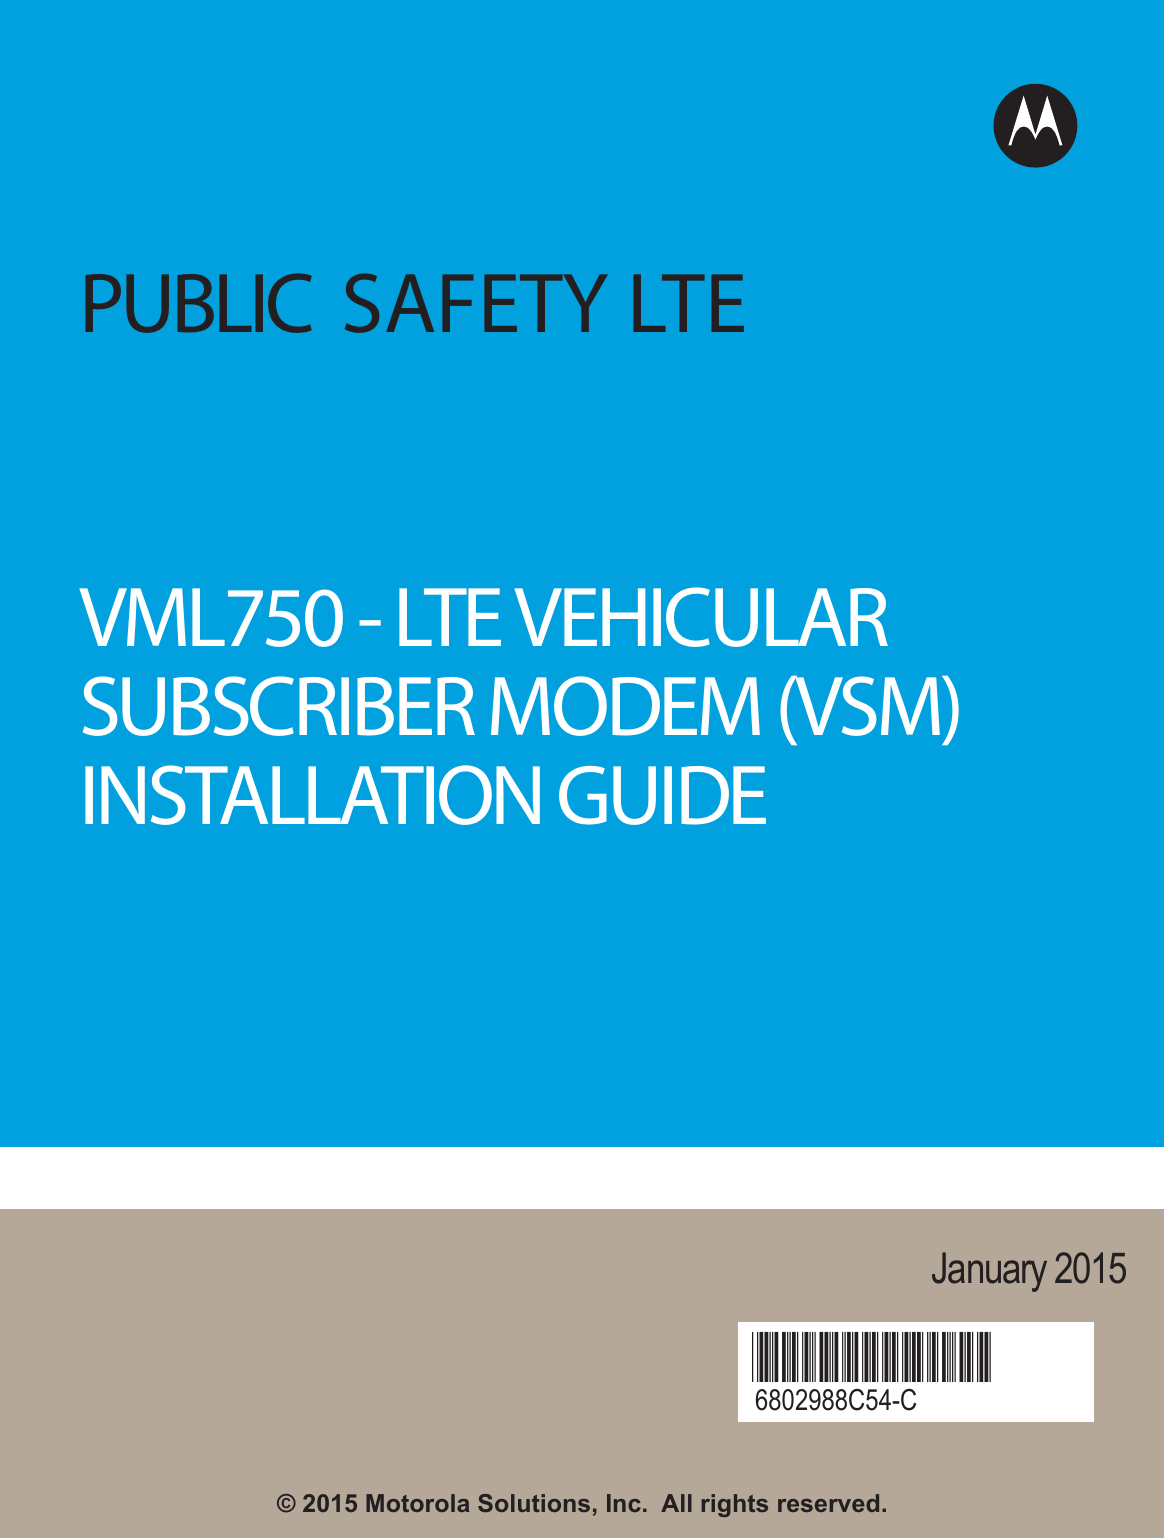 January 20156802988C54-C@6802988C54@VML750 - LTE VEHICULARSUBSCRIBER MODEM (VSM)INSTALLATION GUIDE  © 2015 Motorola Solutions, Inc.  All rights reserved. PUBLIC SAFETY LTE 